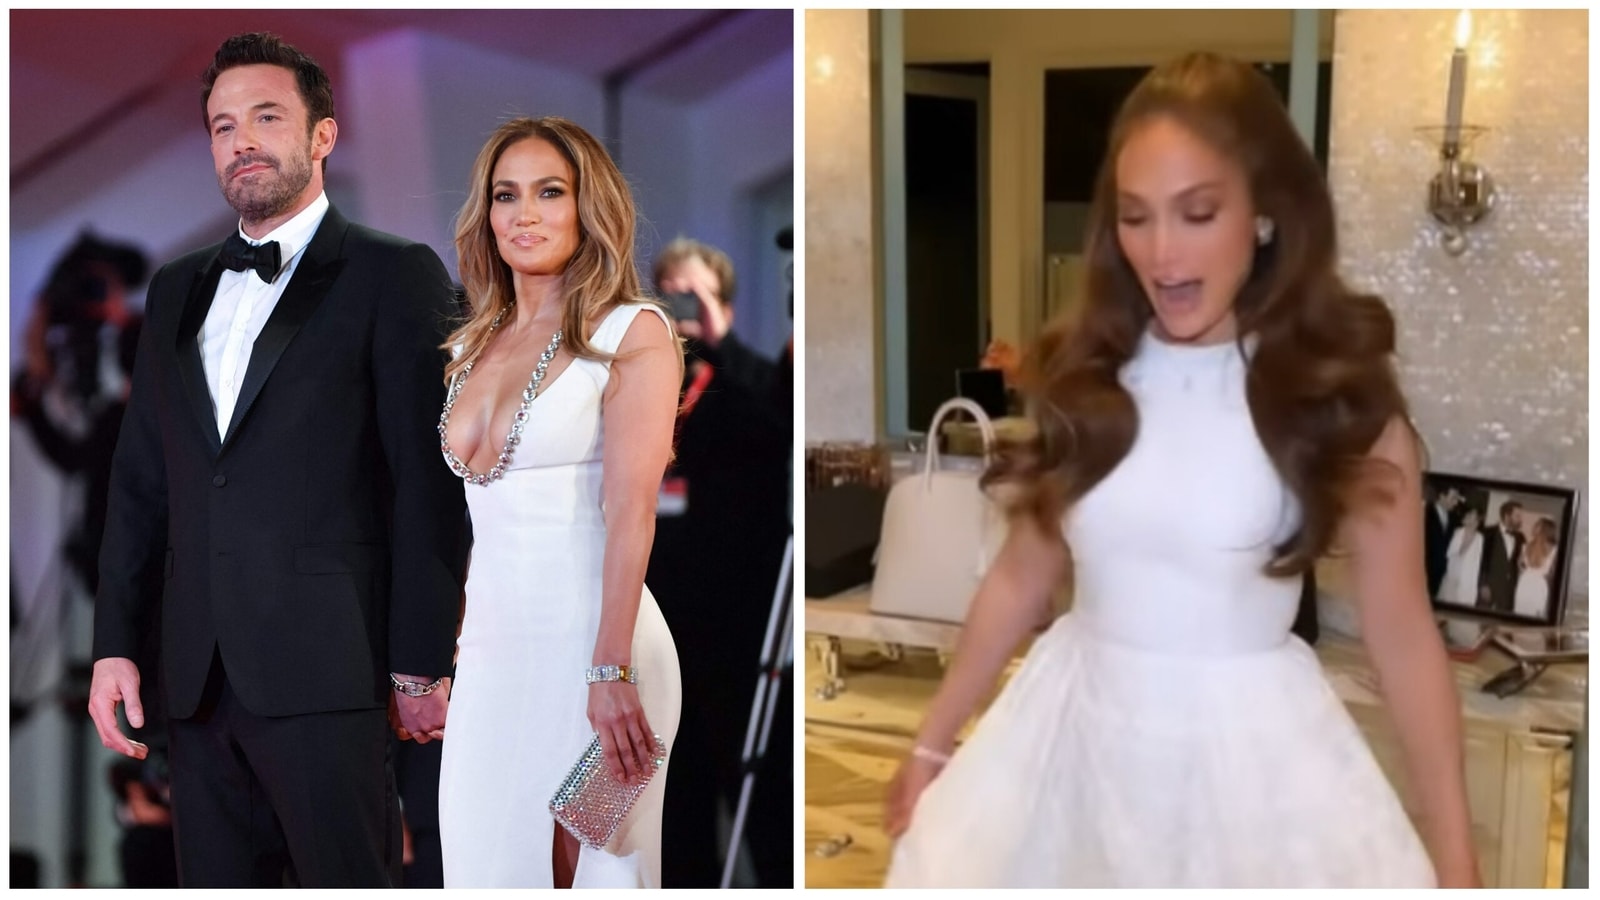 It took 20 years for Jennifer Lopez and Ben Affleck to get married, see her bridal gown she was saving for D-Day